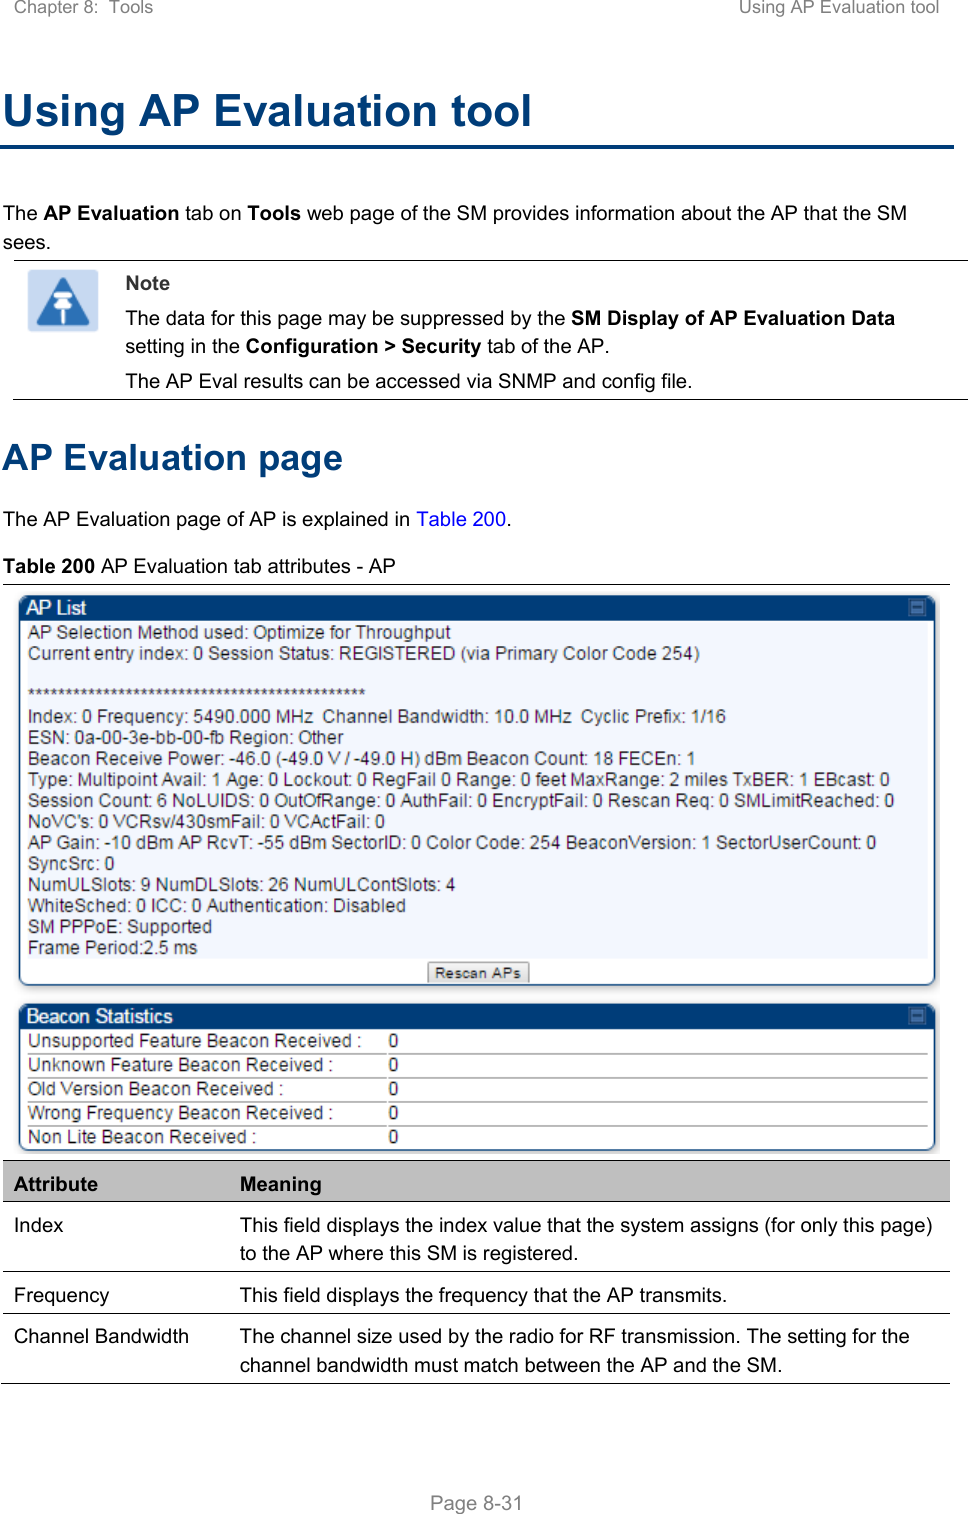 Chapter 8:  Tools  Using AP Evaluation tool   Page 8-31 Using AP Evaluation tool The AP Evaluation tab on Tools web page of the SM provides information about the AP that the SM sees.   Note The data for this page may be suppressed by the SM Display of AP Evaluation Data setting in the Configuration &gt; Security tab of the AP. The AP Eval results can be accessed via SNMP and config file. AP Evaluation page  The AP Evaluation page of AP is explained in Table 200. Table 200 AP Evaluation tab attributes - AP Attribute  Meaning Index  This field displays the index value that the system assigns (for only this page) to the AP where this SM is registered. Frequency  This field displays the frequency that the AP transmits. Channel Bandwidth  The channel size used by the radio for RF transmission. The setting for the channel bandwidth must match between the AP and the SM.  